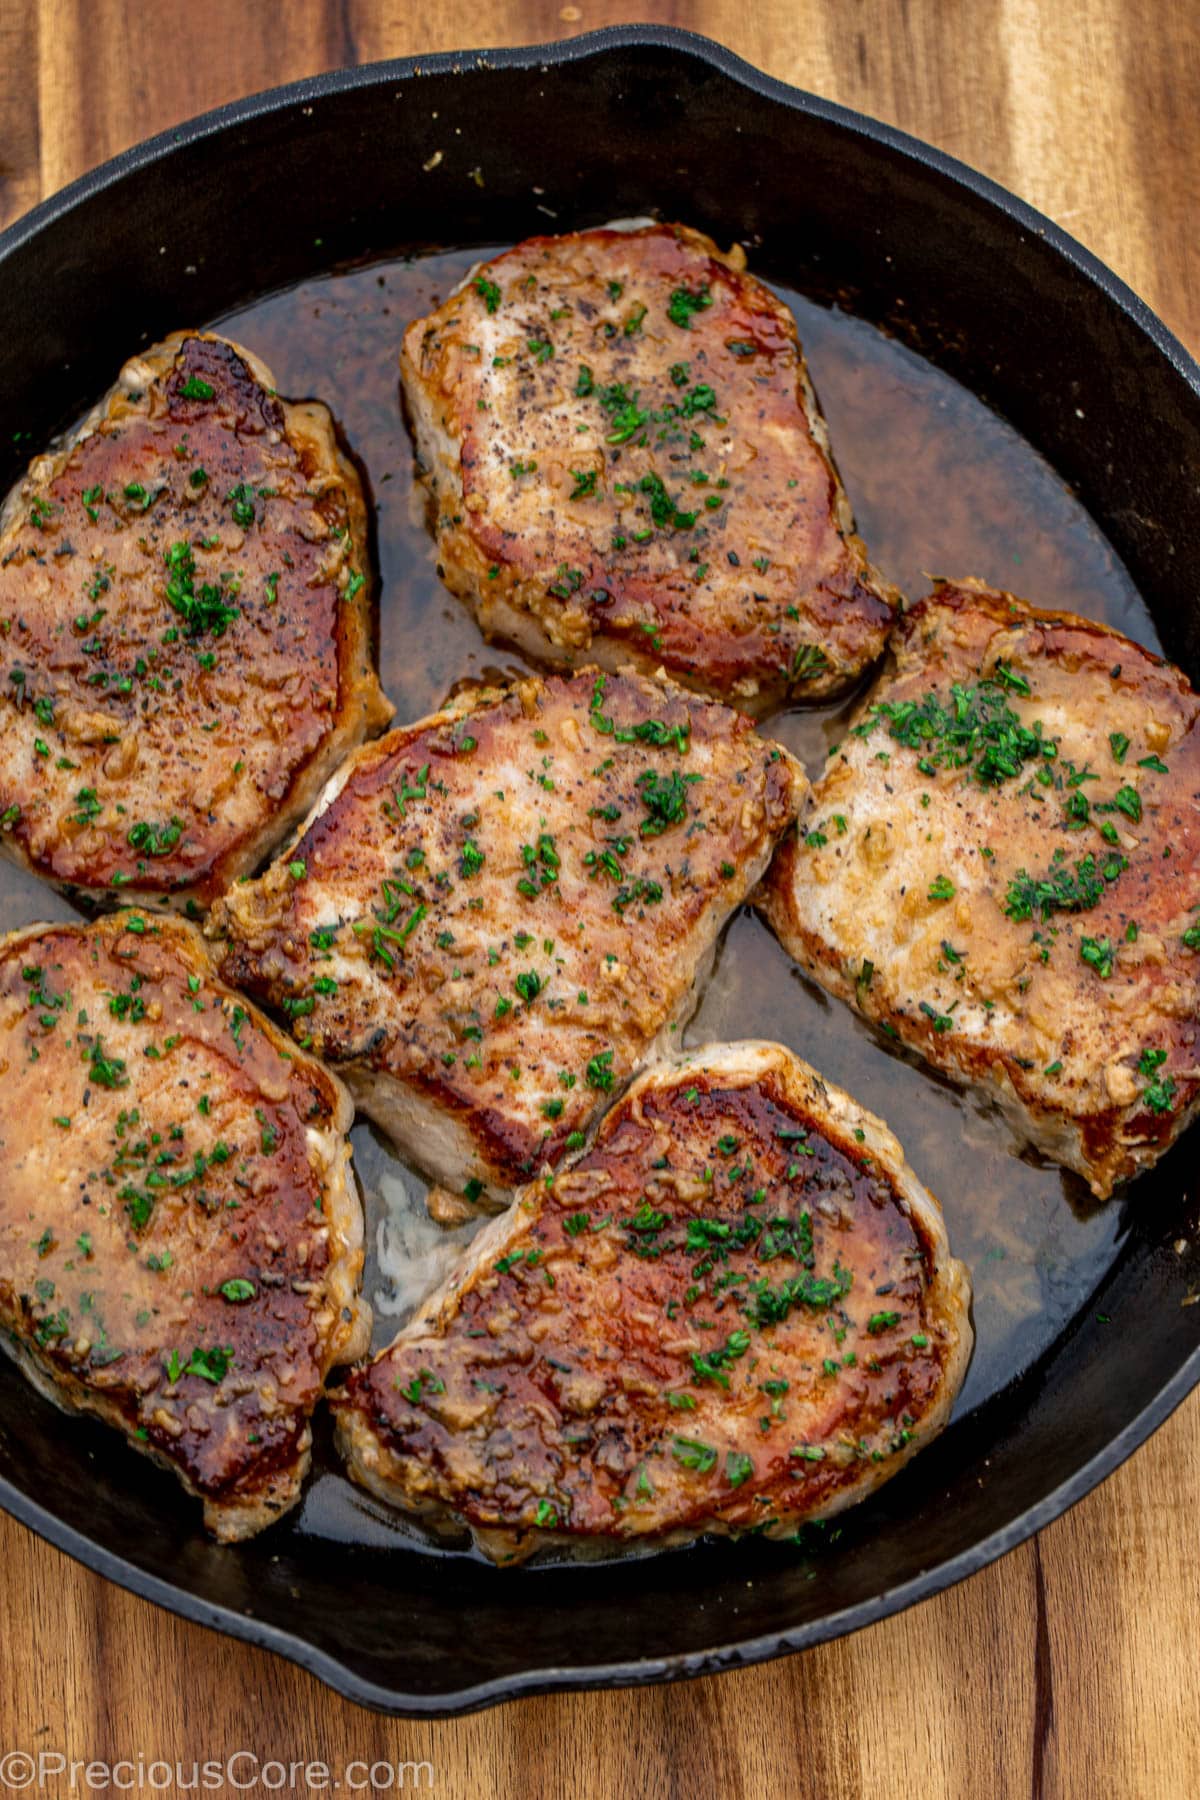 Cooked pork chops in butter sauce.